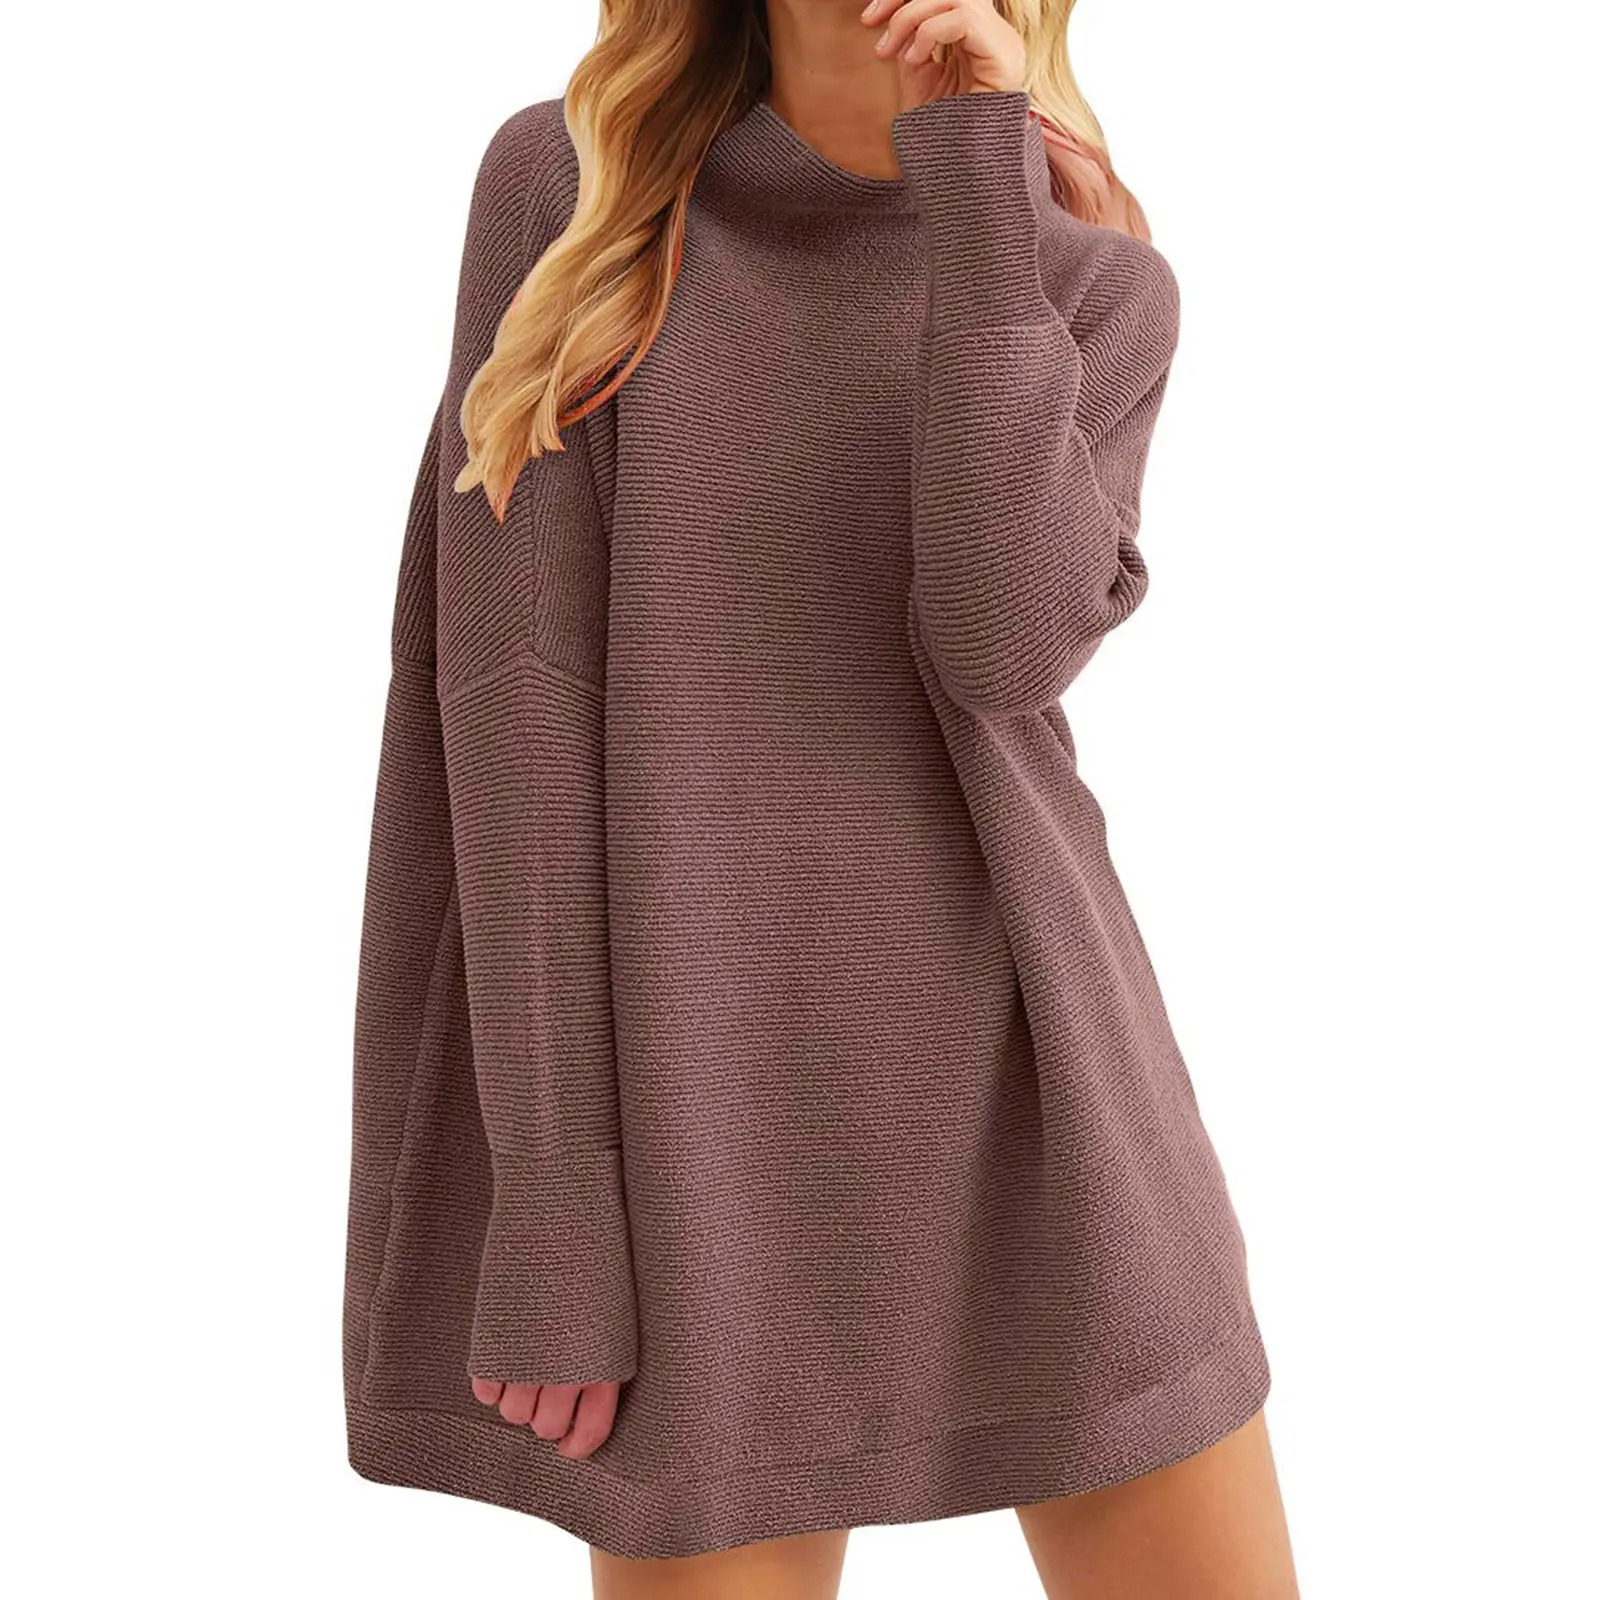 Turtleneck Batwing Sleeve Oversized Ribbed Knit Dress Loose Casual Women's Sweaters Pullover